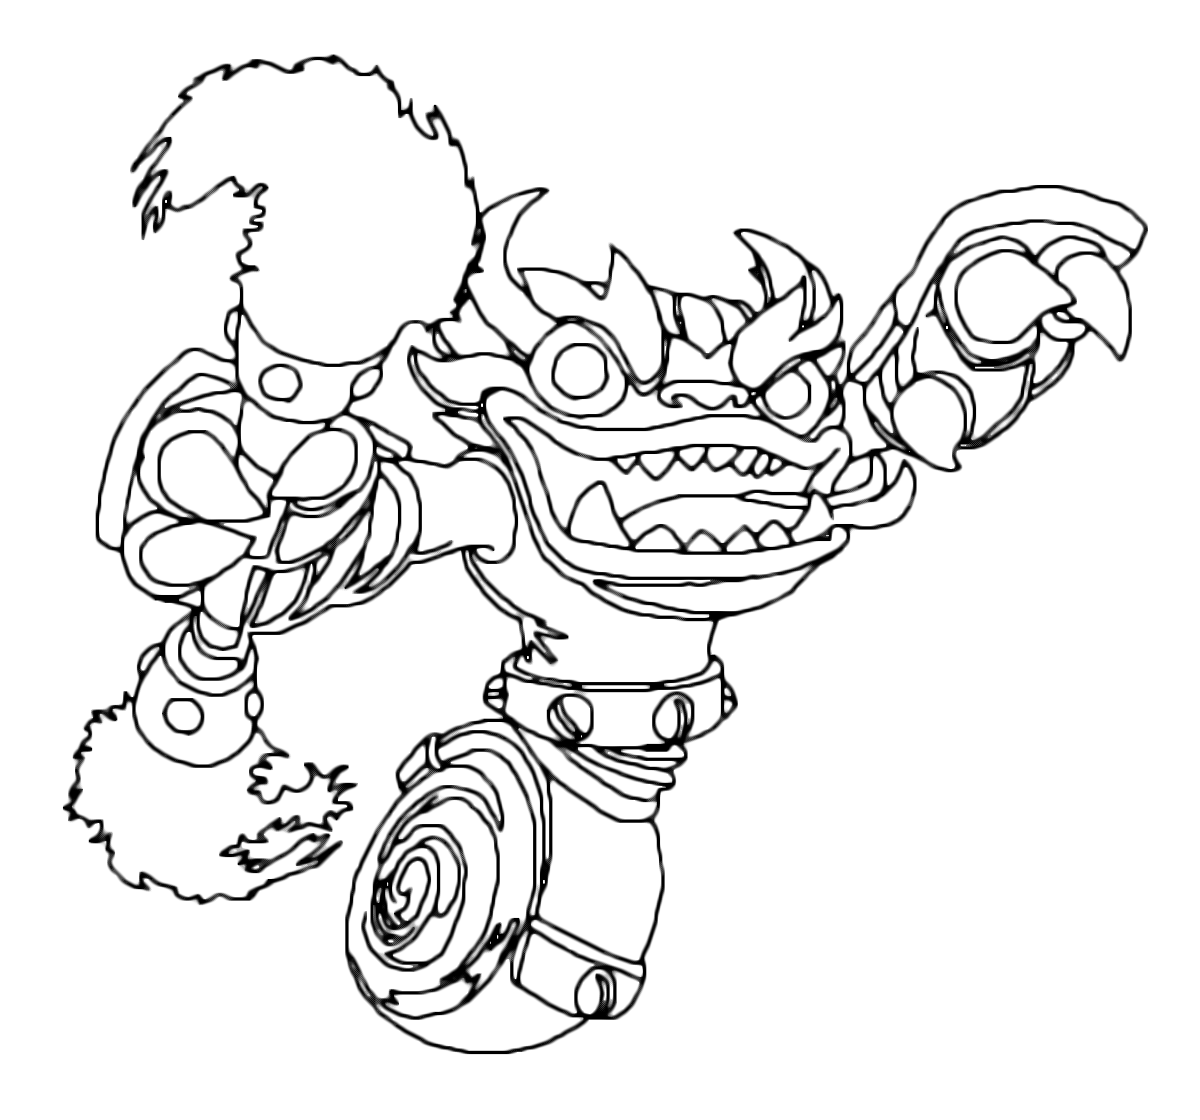 Skylanders - Swap Force - The combative Fire Charge